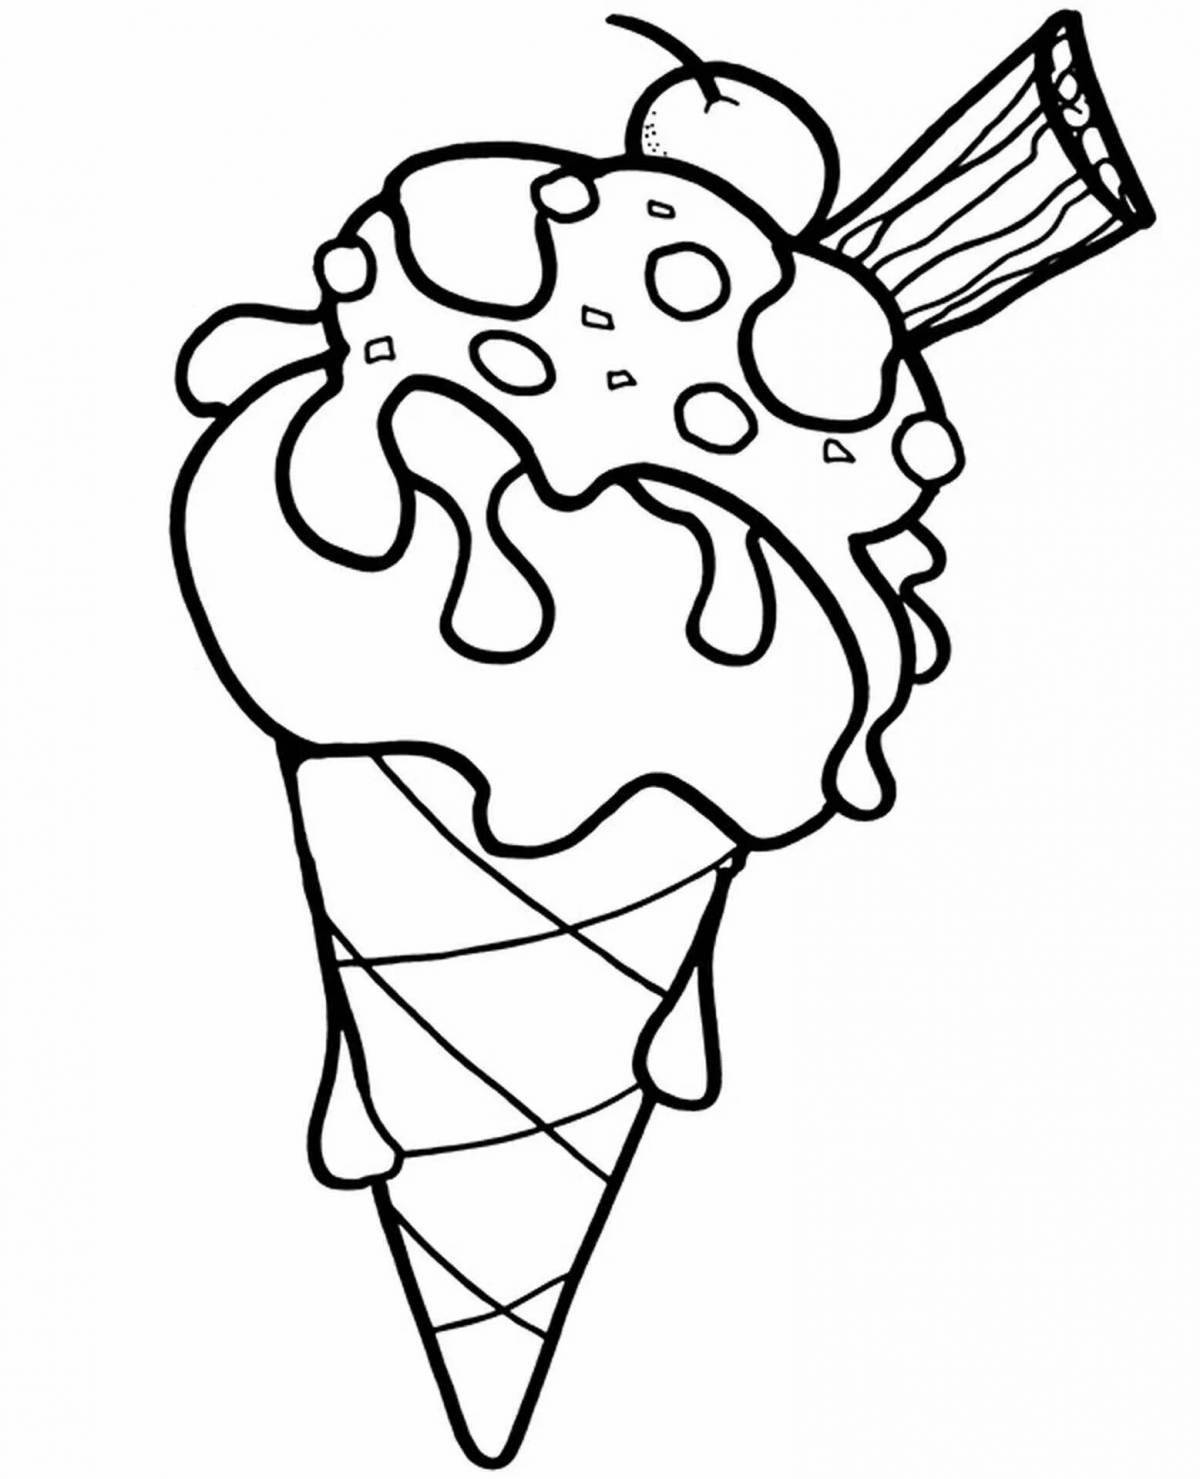 Colored ice cream coloring page